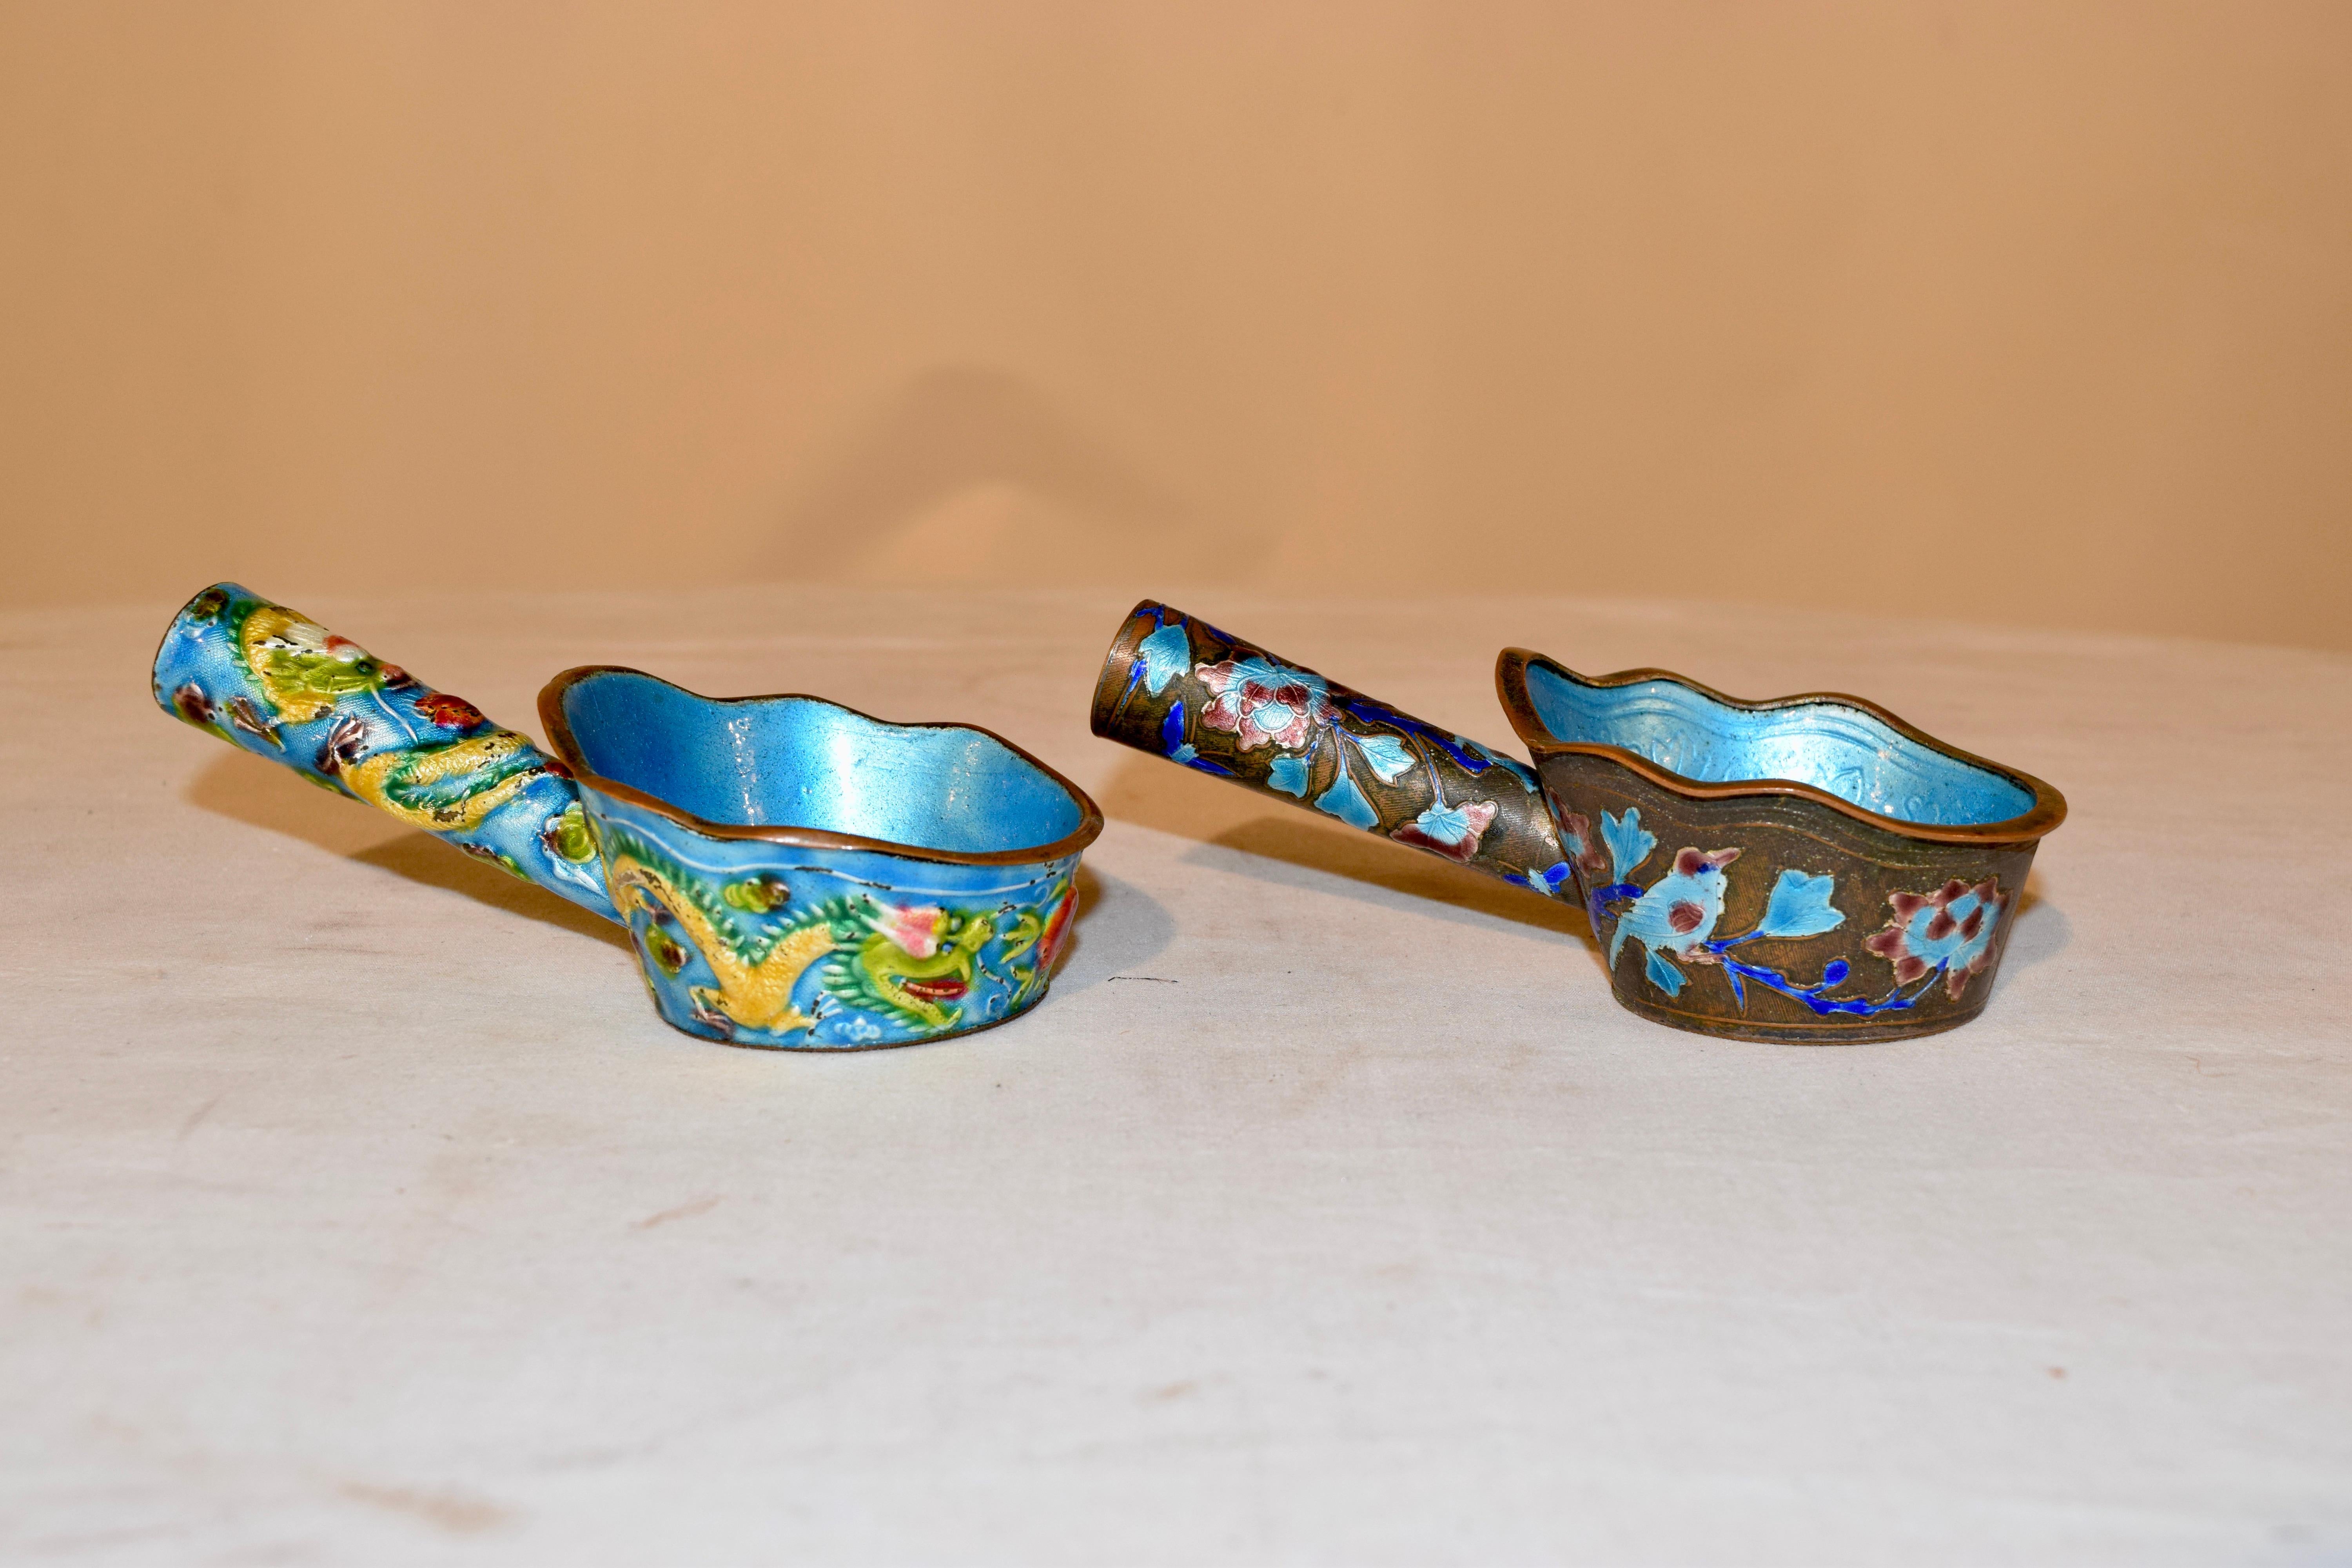 Pair of late 19th century antique copper water dipping or sauce ladles which are very ornate. they are hand enameled with dragons, flowers and an angel-like figure on one handle. The handles are decorated as well. The background is a blue glaze